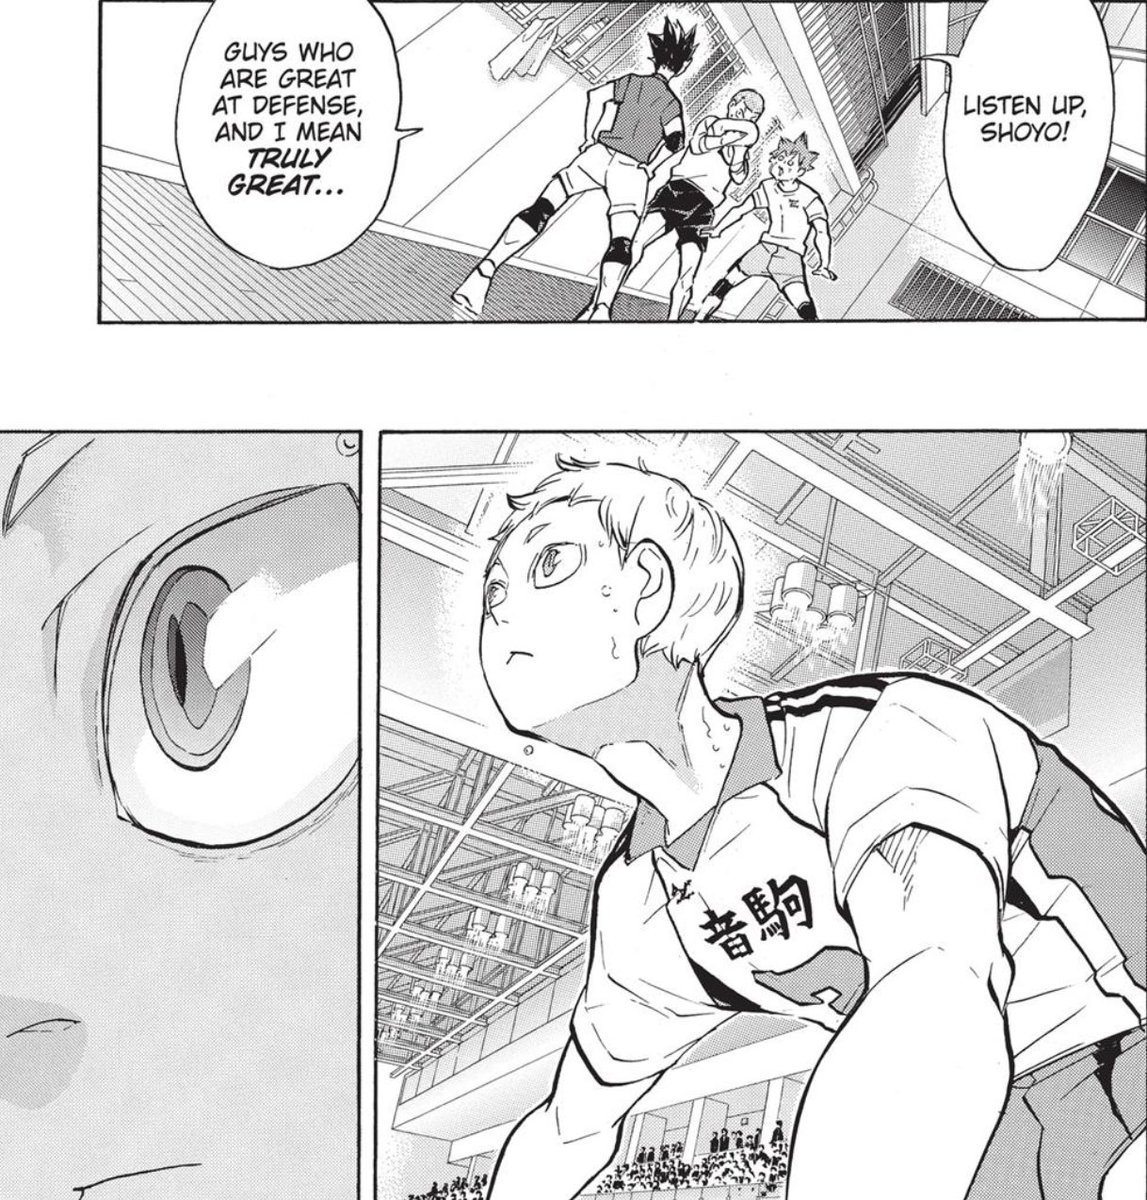 im so close to believe that nishinoya might be yaku's #1 fan

nishinoya talk about yaku's skills all the time and we know that. but the way nishinoya describe yaku?

- "the best defenders aren't necessarily the flashiest players on the court" 